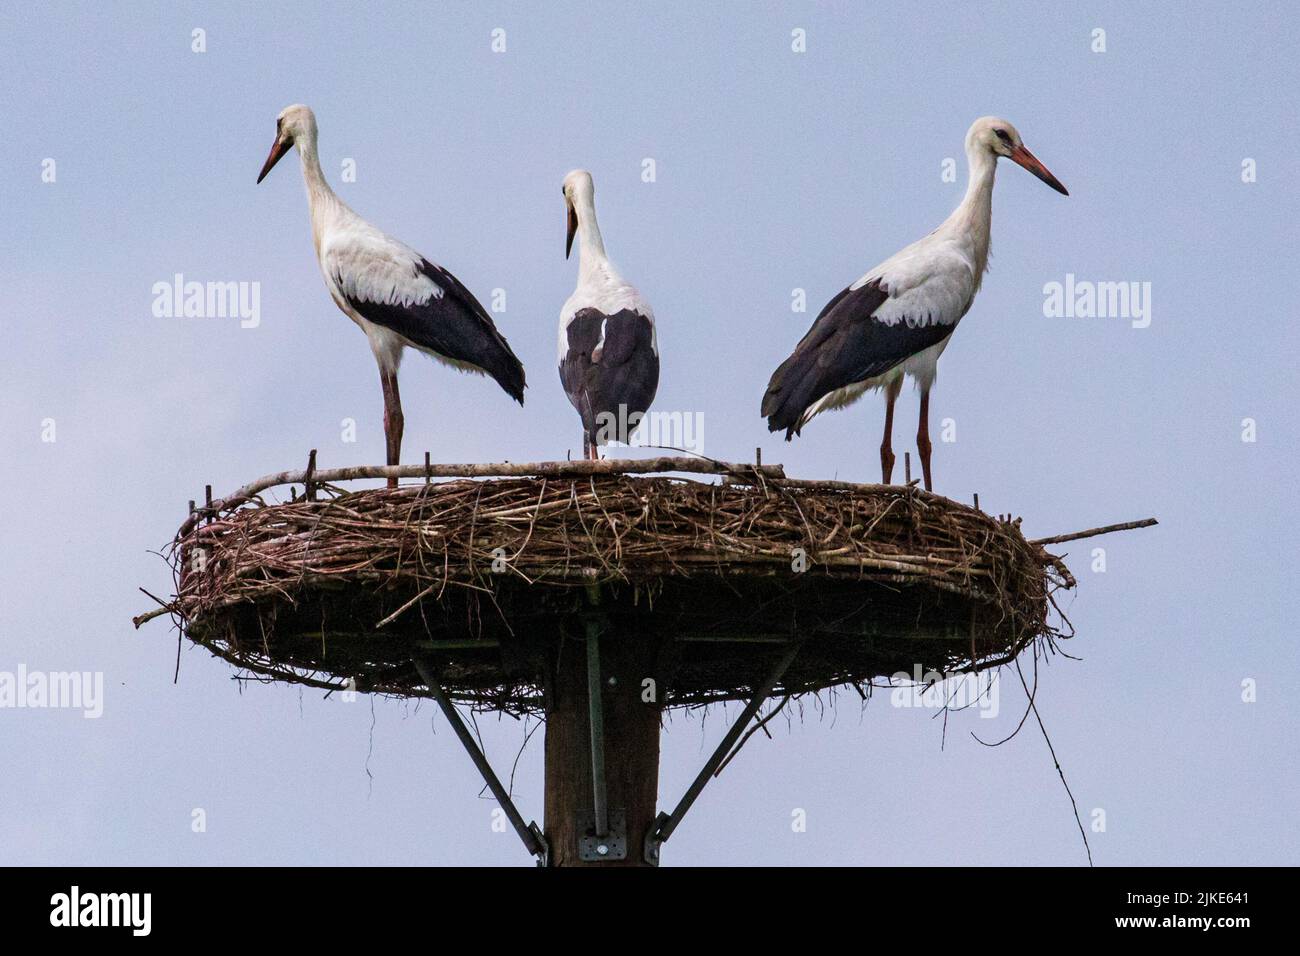 Dülmen, Münsterland, NRW, Germany. 1st Aug, 2022. The female with her two juveniles. A family of two adult white storks (Ciconia ciconia) with their two circa four months old juveniles, get ready to leave their nesting site before they will join a flock to start the long journey South for their winter migration in a few weeks. Both juveniles are now large enough to join their parents on daily flights and foraging trips in the area. Credit: Imageplotter/Alamy Live News Stock Photo